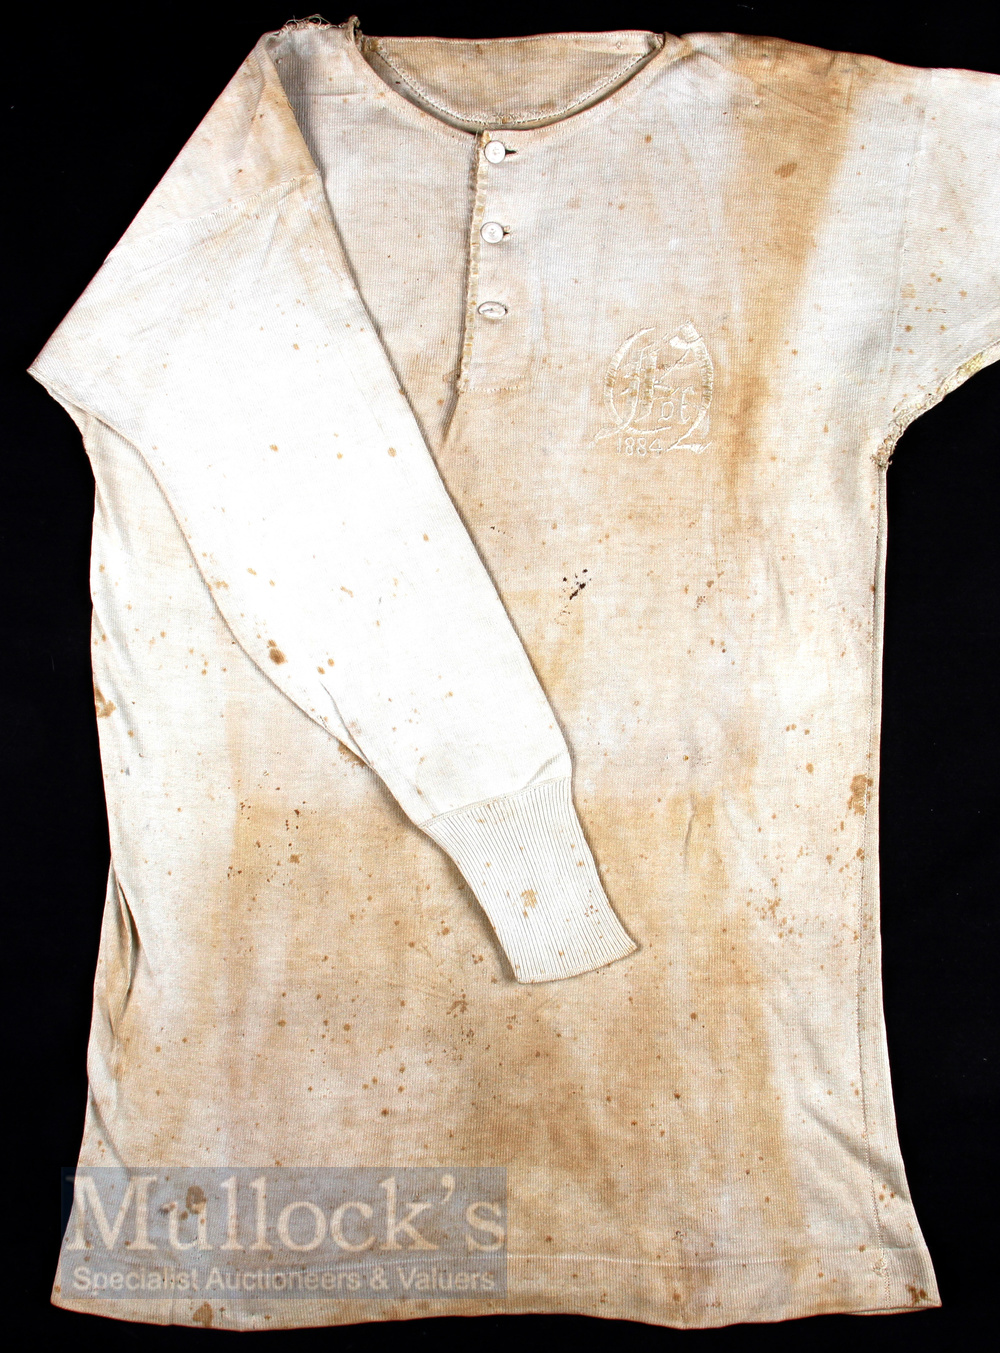 Very Rare 1884 North of England Rugby Jersey from the North v South England Rugby Trial Match: - Image 2 of 5